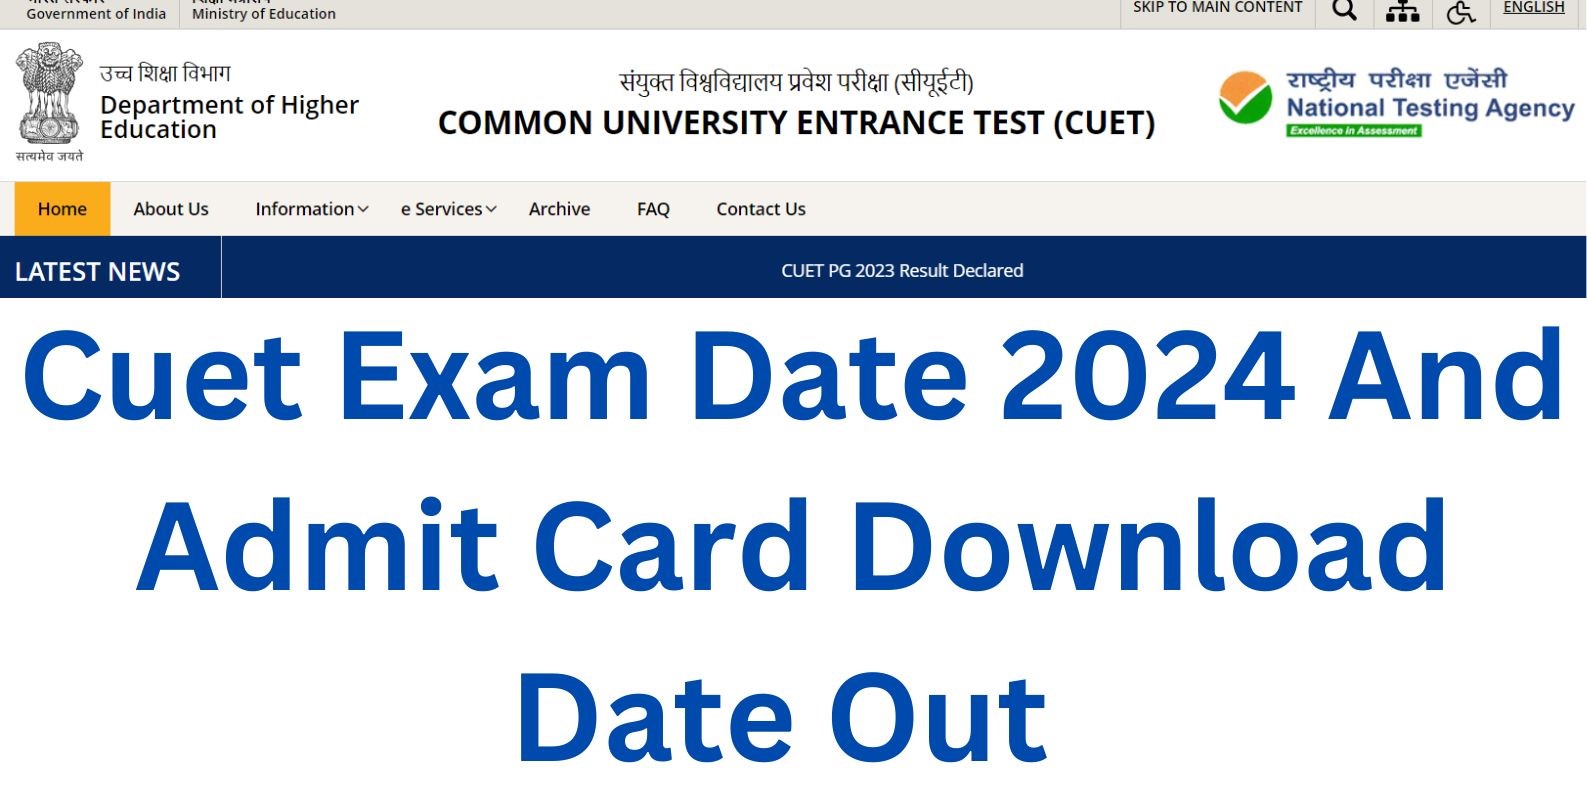 Cuet Exam Date 2024 And Admit Card Download Date Out